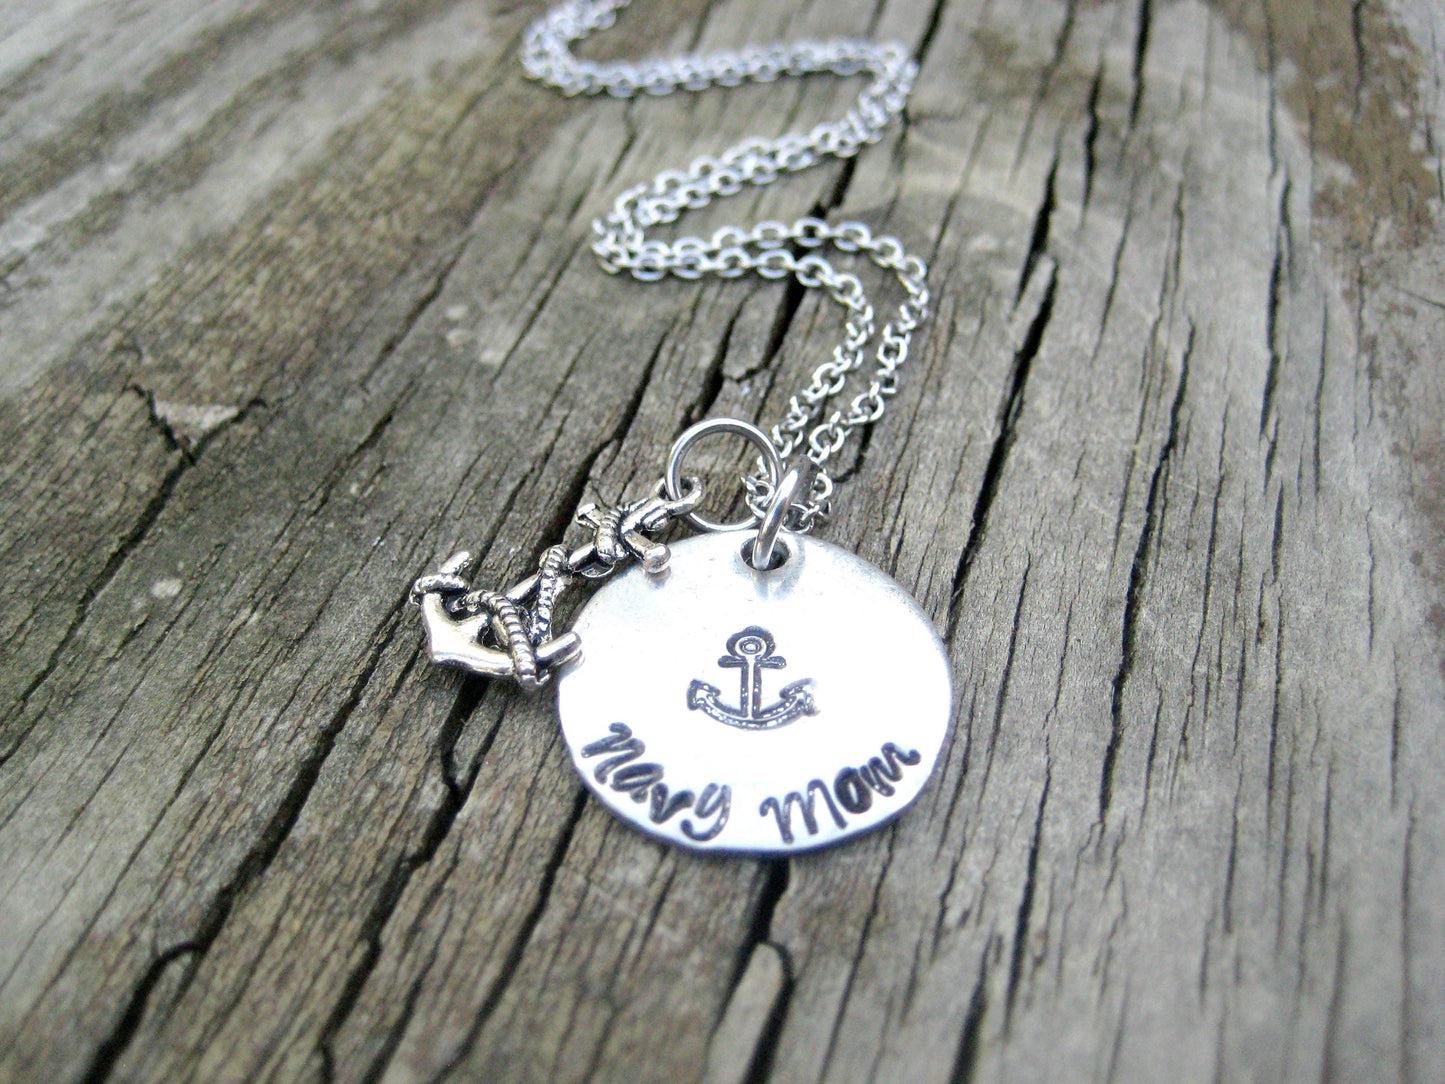 NAVY MOM NECKLACE - Hand Stamped, Navy Mom Necklace, with Anchor Charm, Mother's Day Gift, Gift for Navy Mom, Gift for Mom, Navy Mom Gift